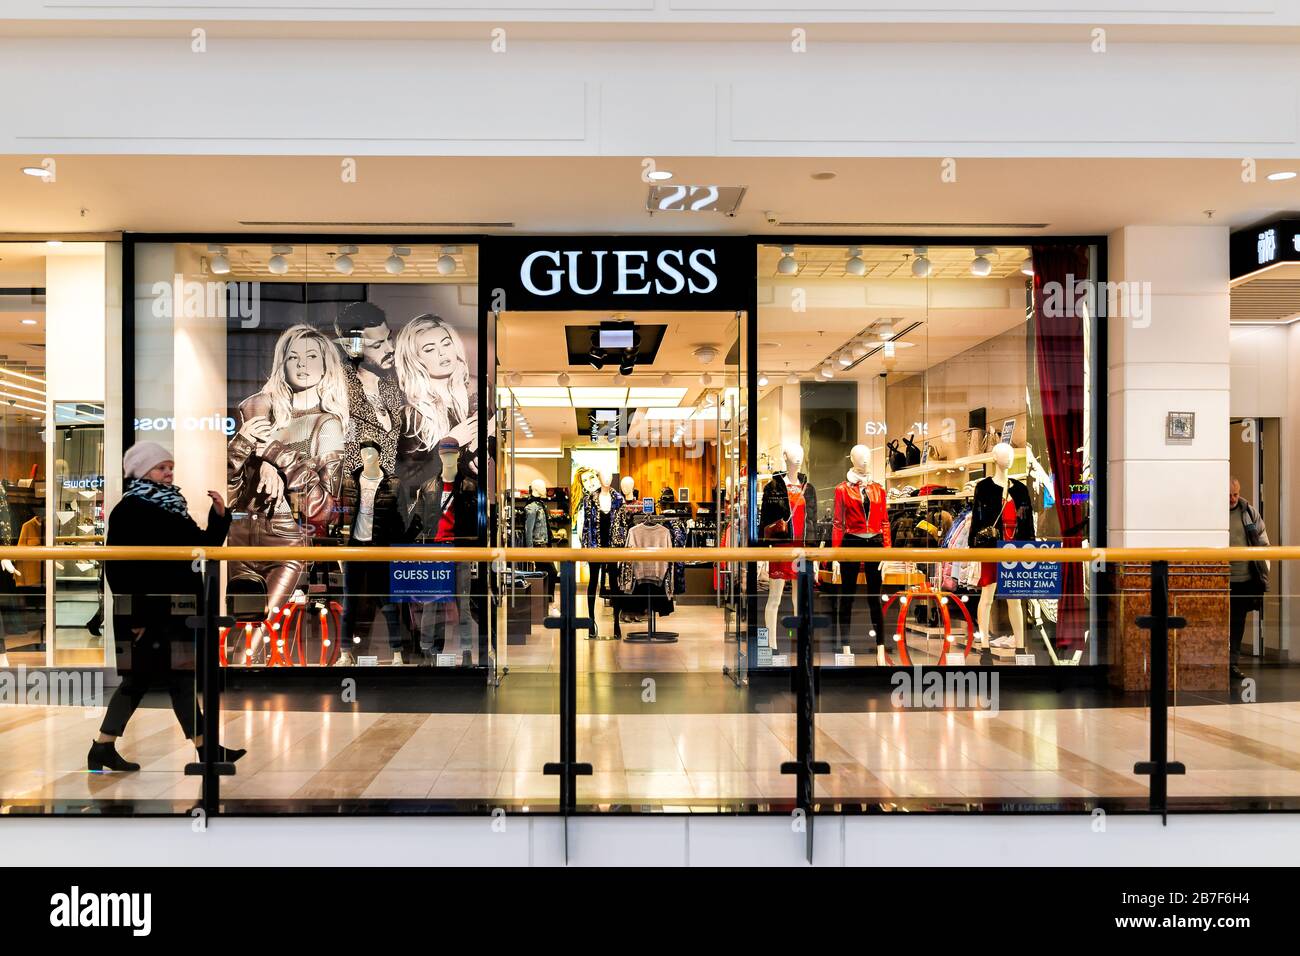 Warsaw, Poland - December 23, 2019: Storefront sign for Guess fashion ...